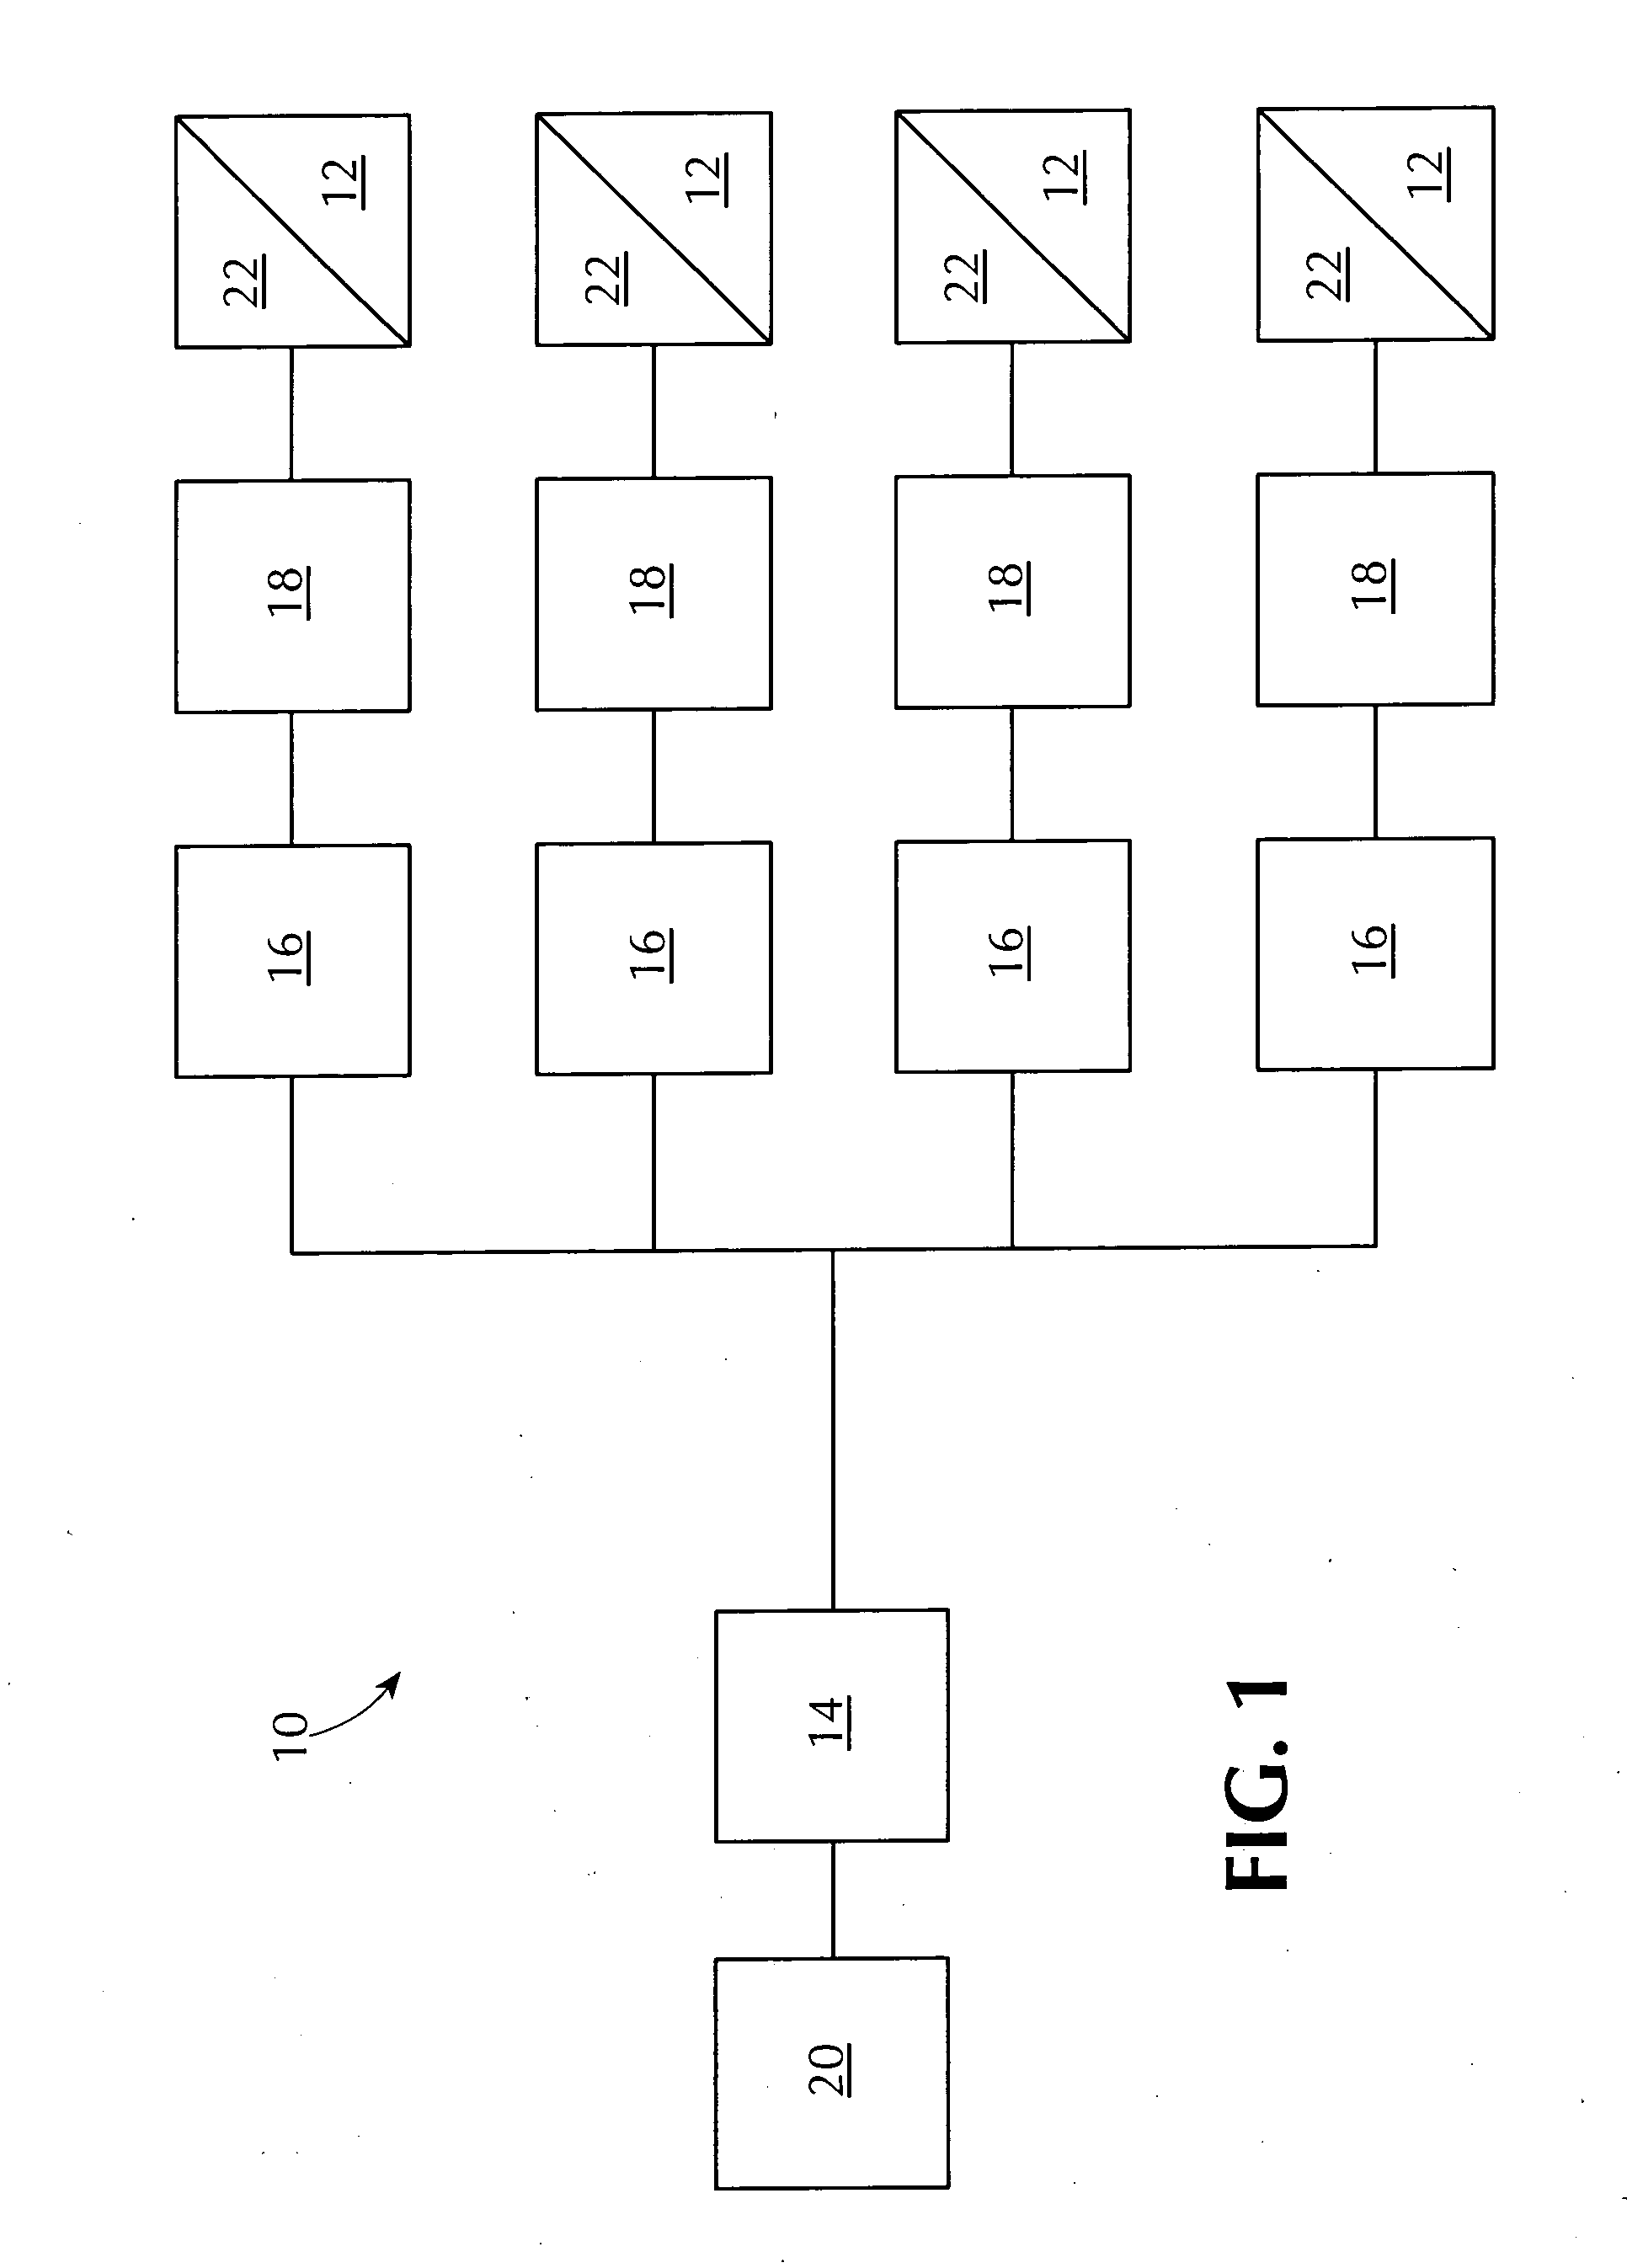 Single electric vehicle charger for electrically connecting to multiple electric vehicles simultaneously while automatically charging the multiple electric vehicles sequentially